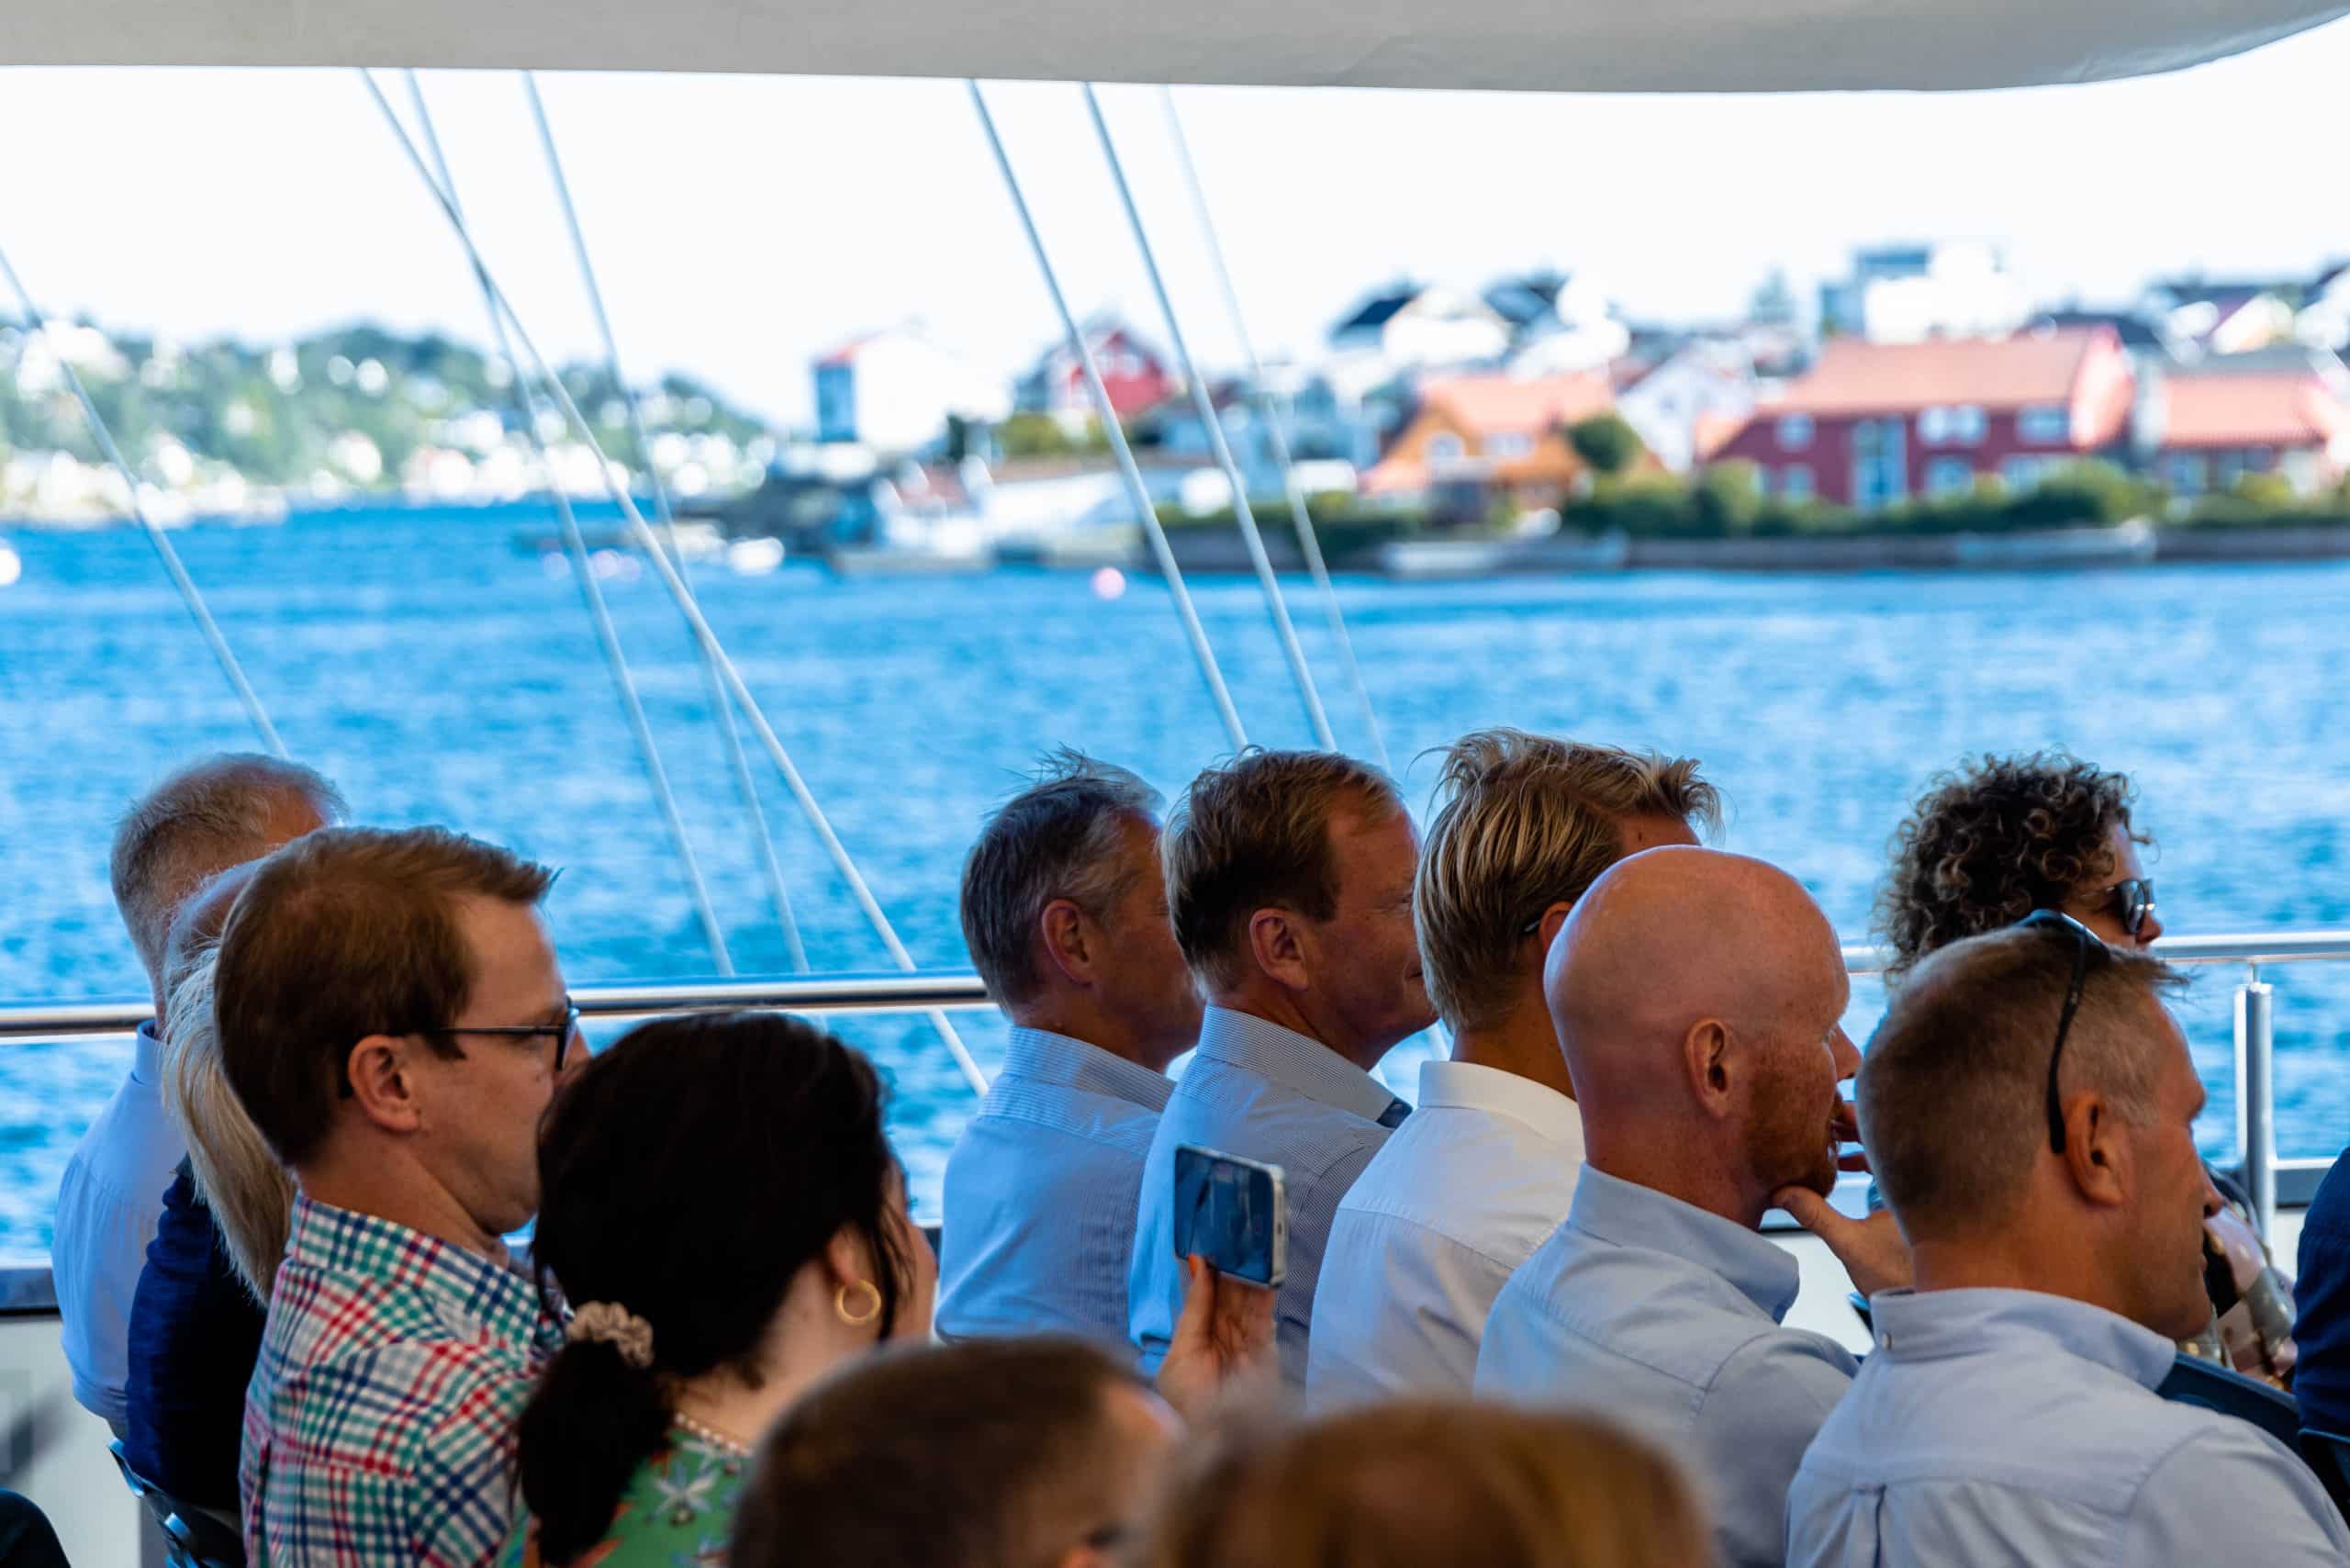 Audience sitting at the event "prime minister for a day" at Arendalsuka